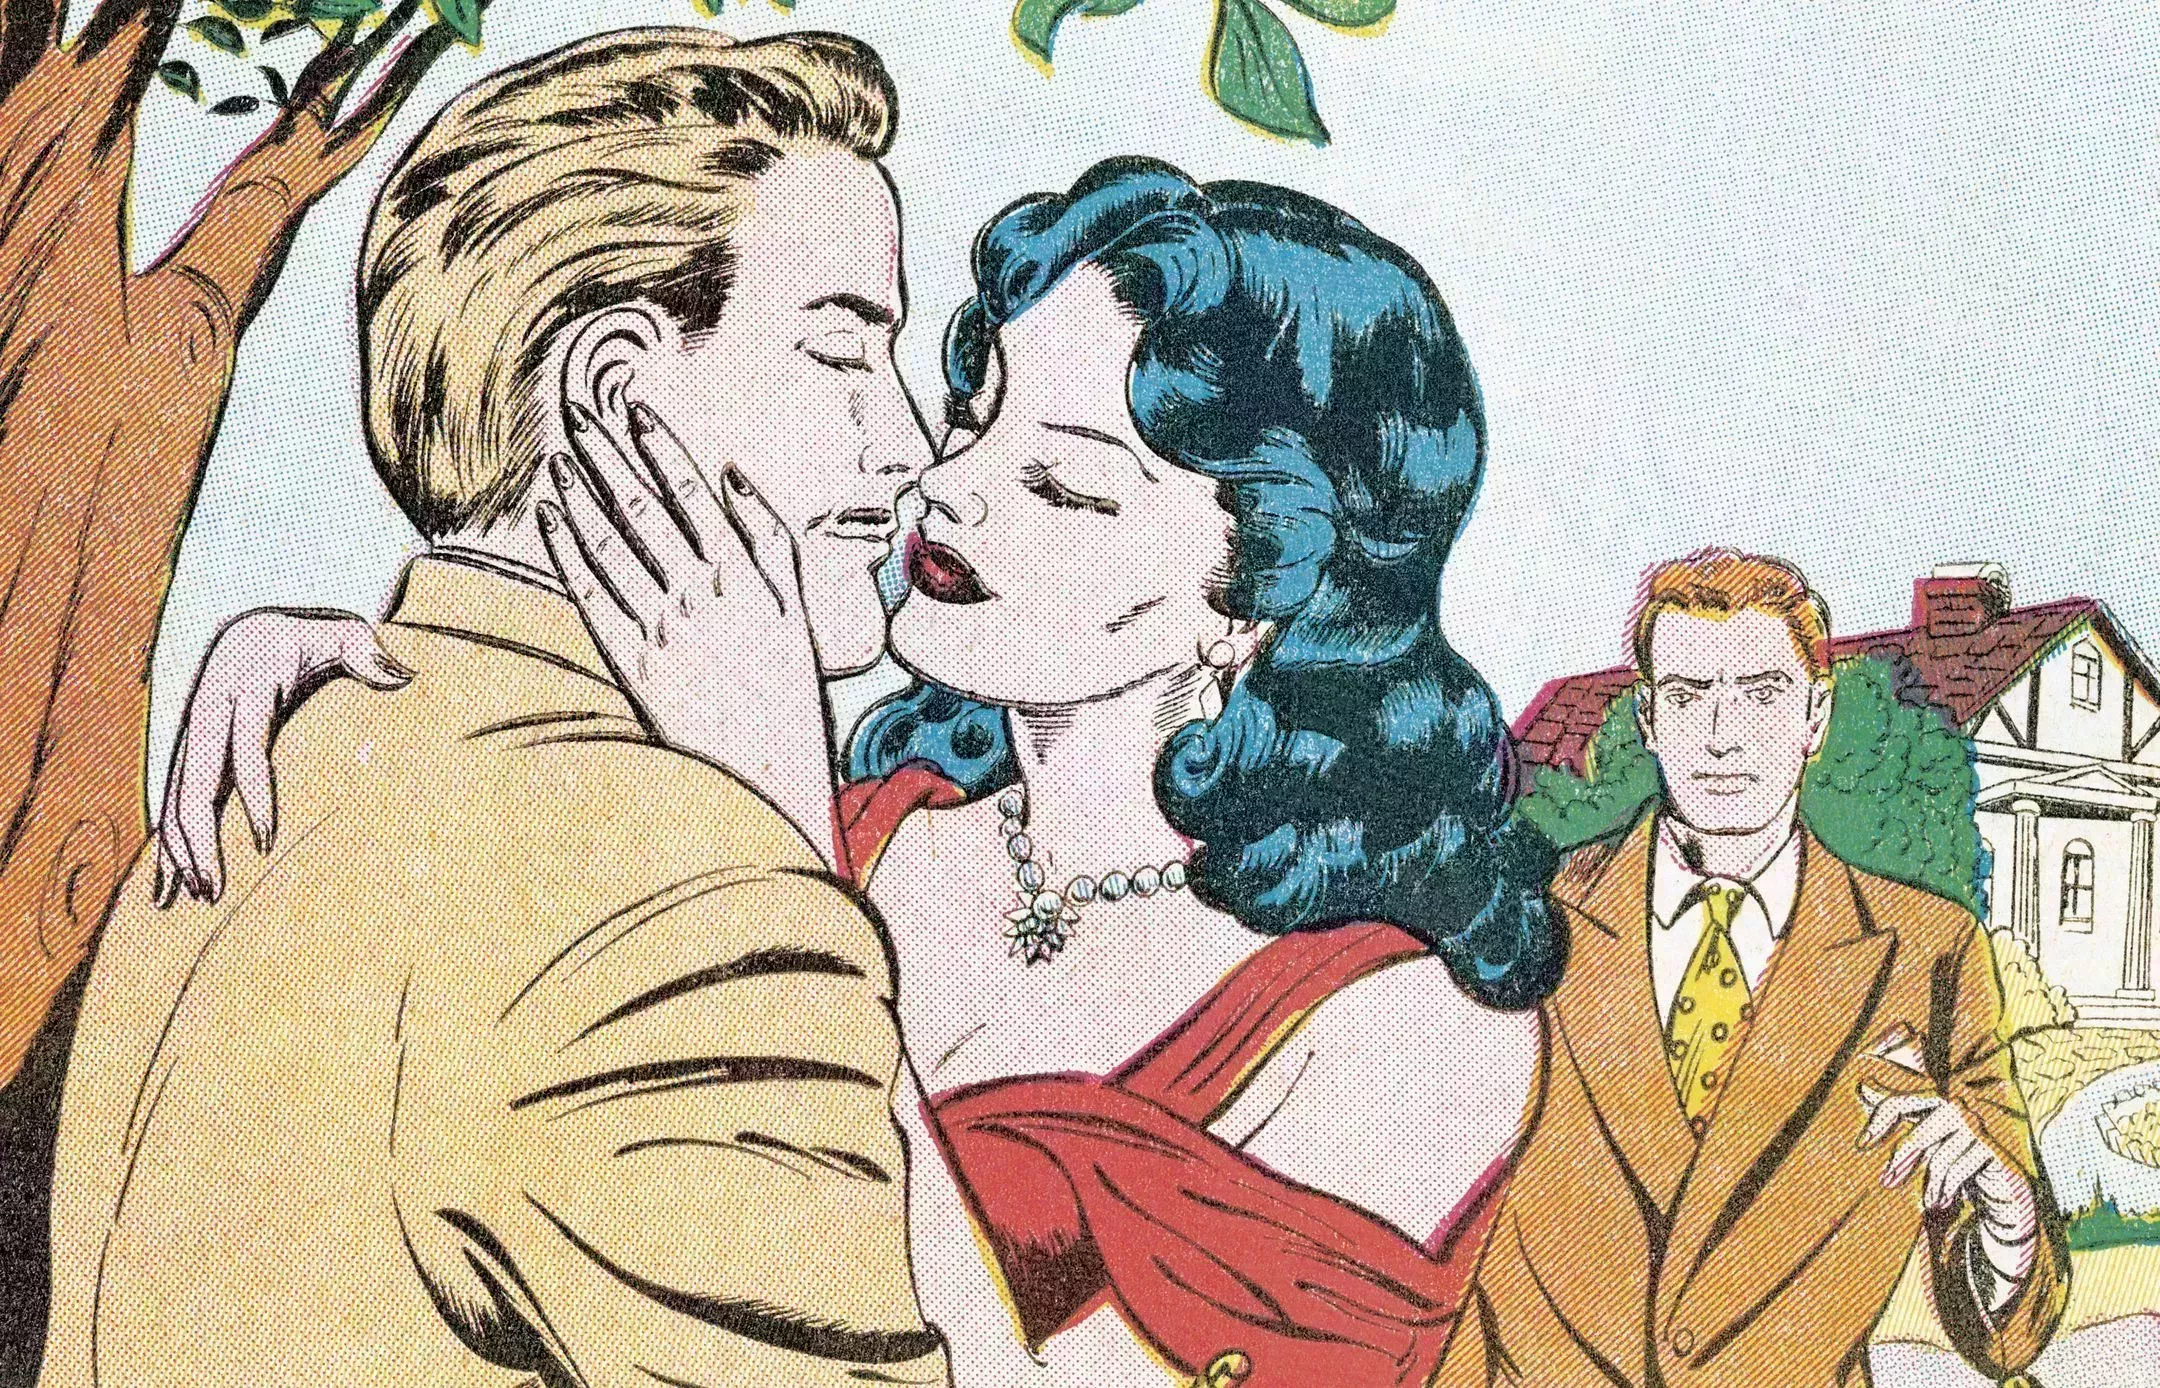 woman kissing a man while another man stands behind her in comic strip style